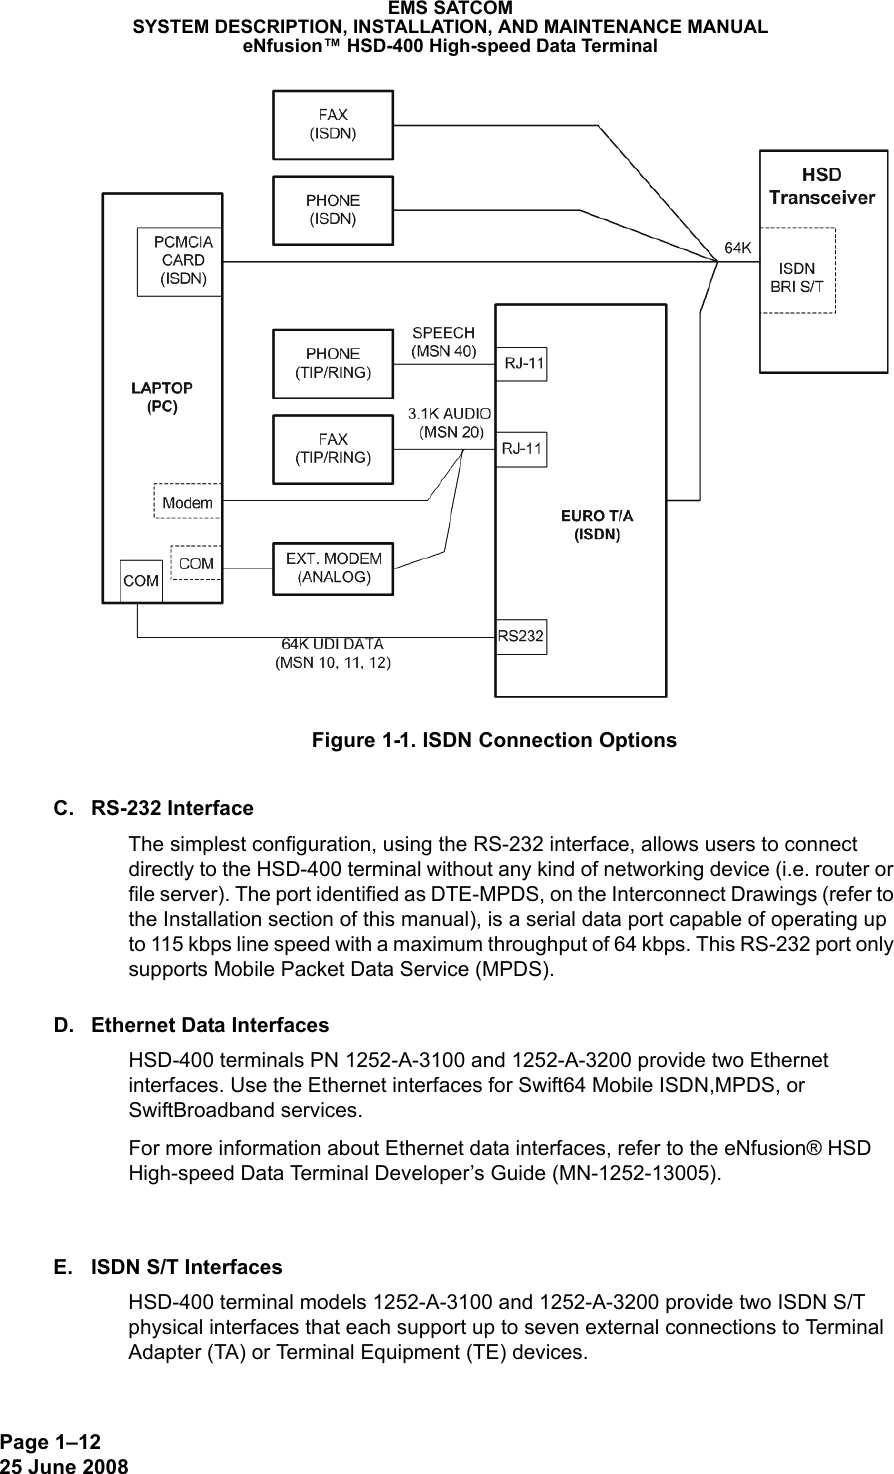 Page 1–1225 June 2008 EMS SATCOMSYSTEM DESCRIPTION, INSTALLATION, AND MAINTENANCE MANUALeNfusion™ HSD-400 High-speed Data TerminalFigure 1-1. ISDN Connection OptionsC. RS-232 Interface The simplest configuration, using the RS-232 interface, allows users to connect directly to the HSD-400 terminal without any kind of networking device (i.e. router or file server). The port identified as DTE-MPDS, on the Interconnect Drawings (refer to the Installation section of this manual), is a serial data port capable of operating up to 115 kbps line speed with a maximum throughput of 64 kbps. This RS-232 port only supports Mobile Packet Data Service (MPDS).D. Ethernet Data InterfacesHSD-400 terminals PN 1252-A-3100 and 1252-A-3200 provide two Ethernet interfaces. Use the Ethernet interfaces for Swift64 Mobile ISDN,MPDS, or SwiftBroadband services.For more information about Ethernet data interfaces, refer to the eNfusion® HSD High-speed Data Terminal Developer’s Guide (MN-1252-13005).E. ISDN S/T InterfacesHSD-400 terminal models 1252-A-3100 and 1252-A-3200 provide two ISDN S/T physical interfaces that each support up to seven external connections to Terminal Adapter (TA) or Terminal Equipment (TE) devices.